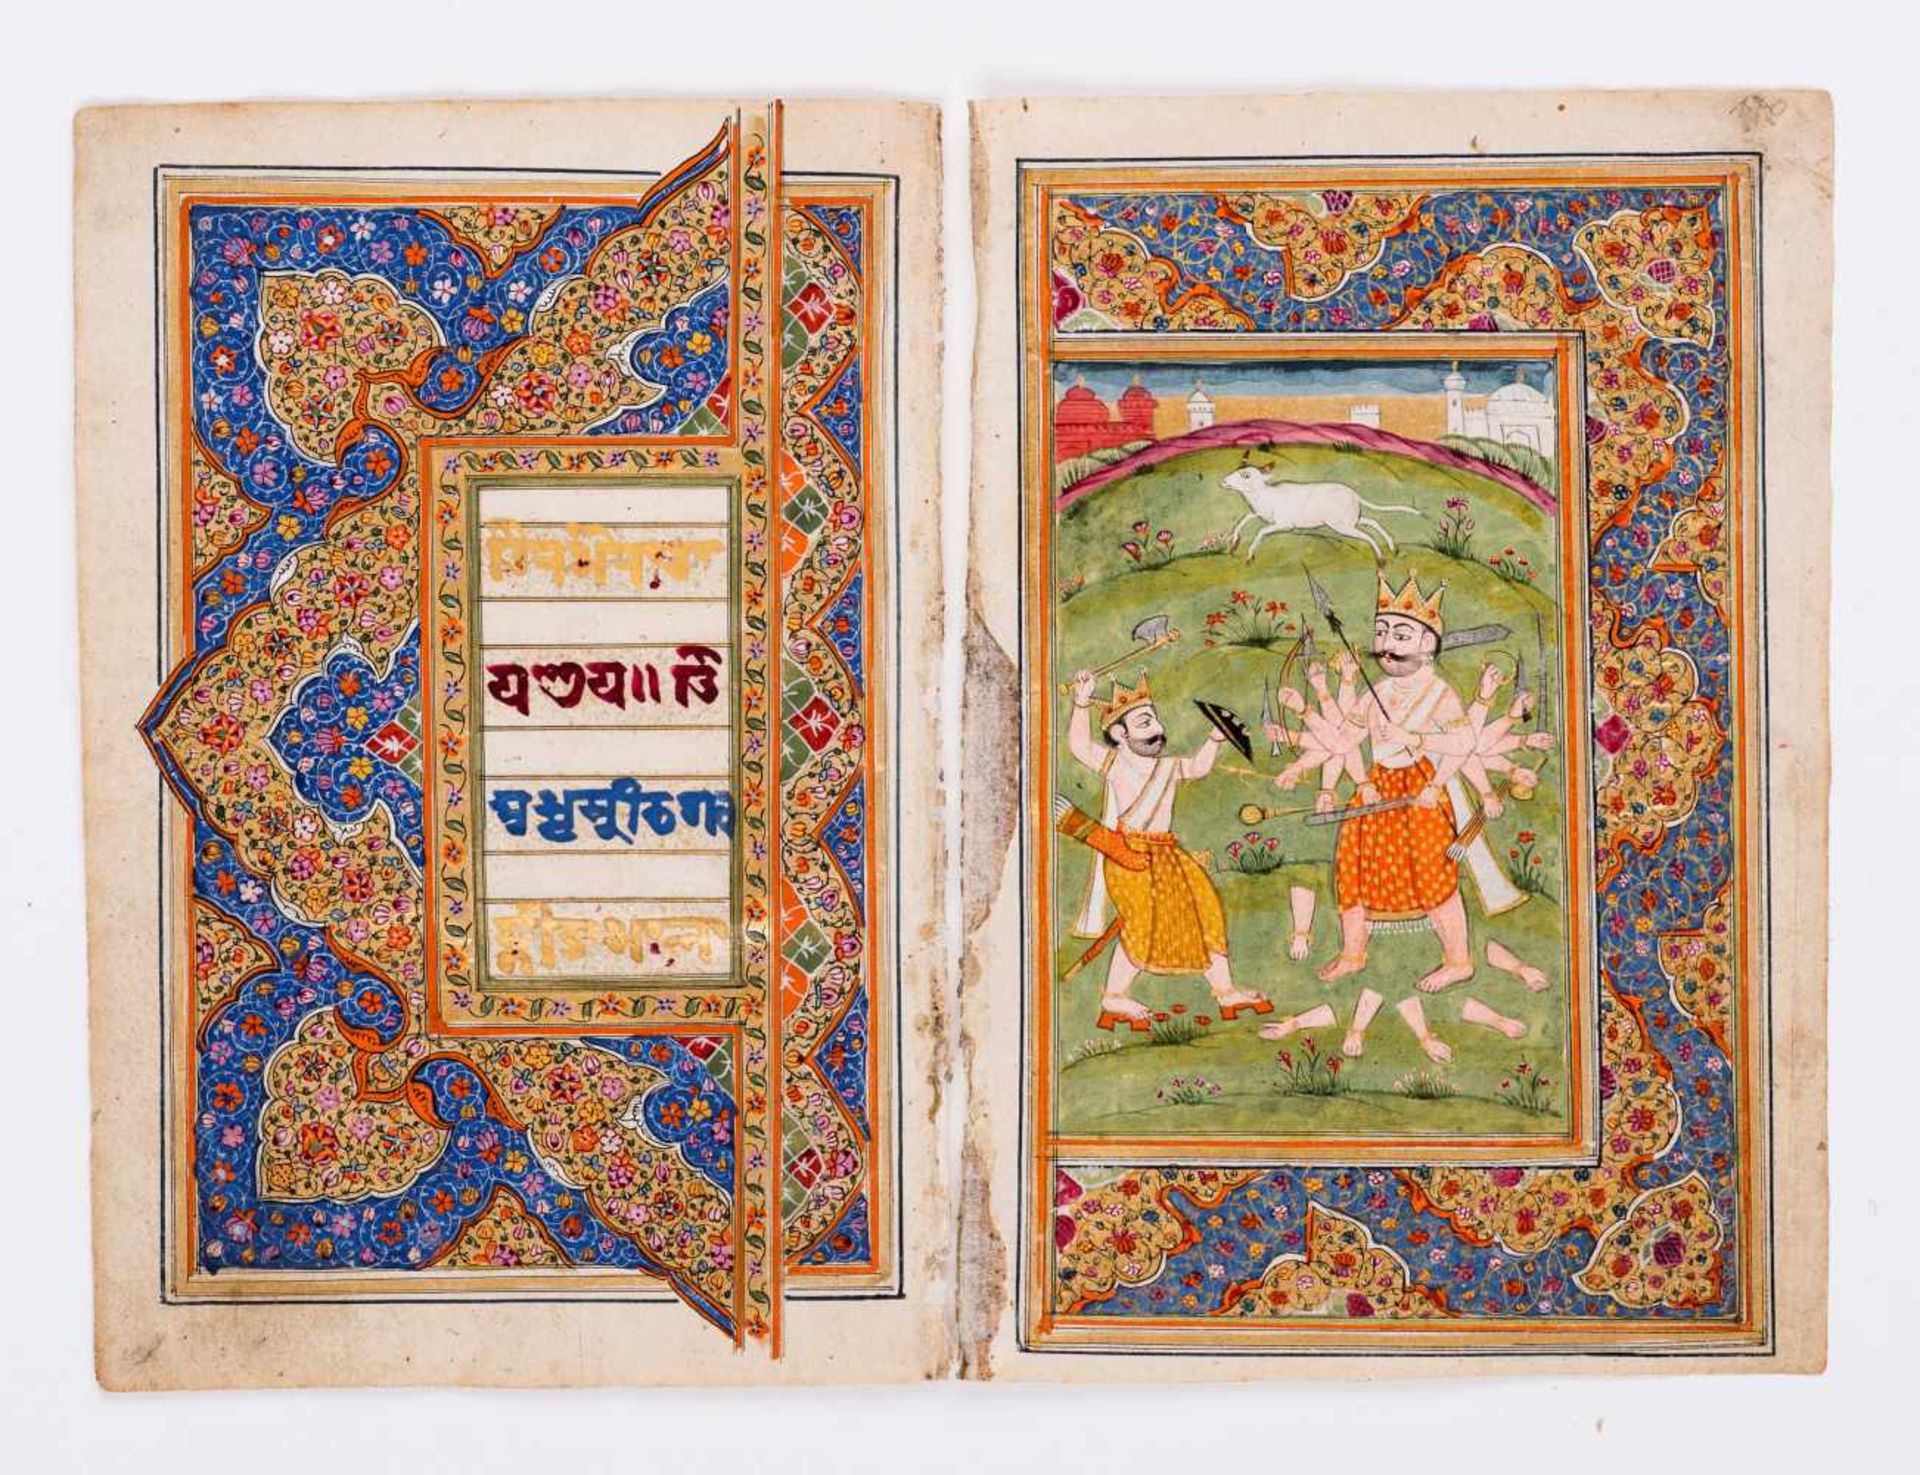 SIX MINIATURE PAINTINGS DEPICTING DEITIES - INDIA, 19th CENTURYMiniature painting with colors and - Bild 2 aus 7